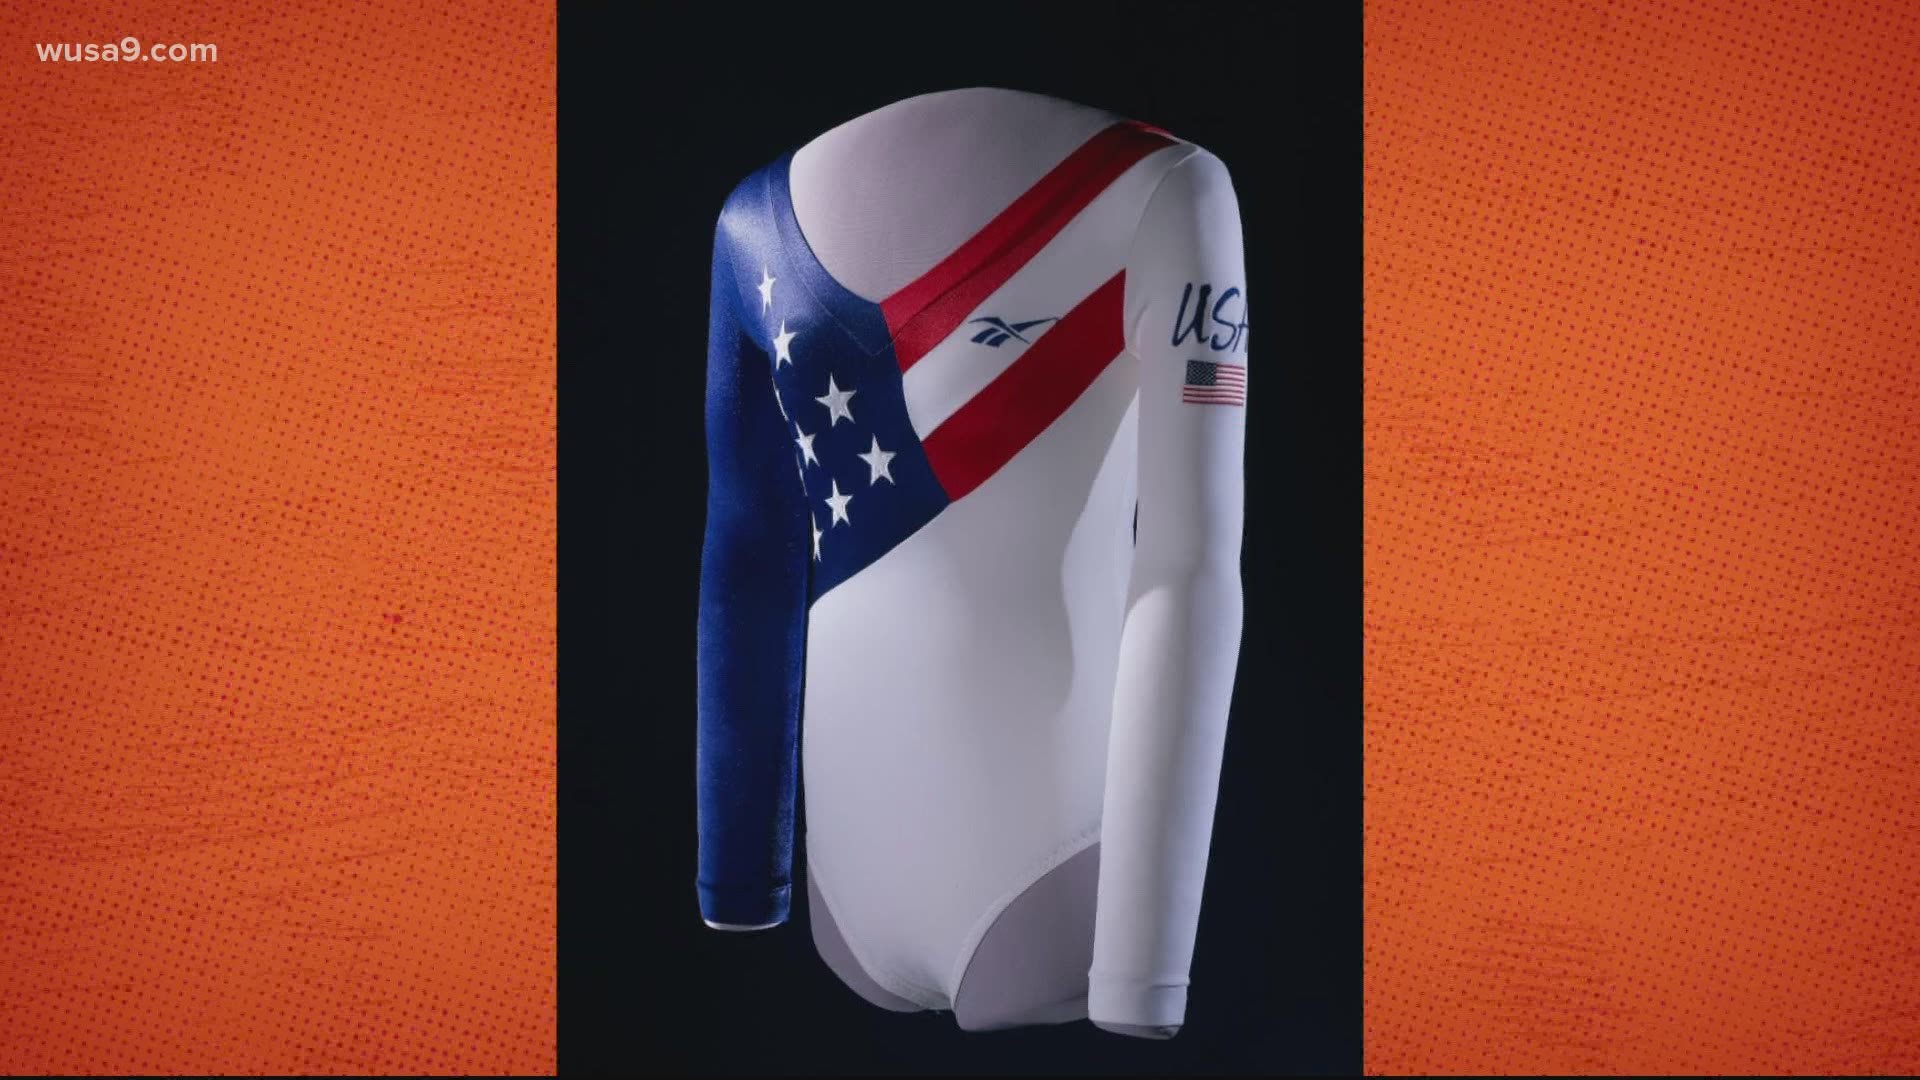 Dawes wore the leotard during the '96 summer games in Atlanta.